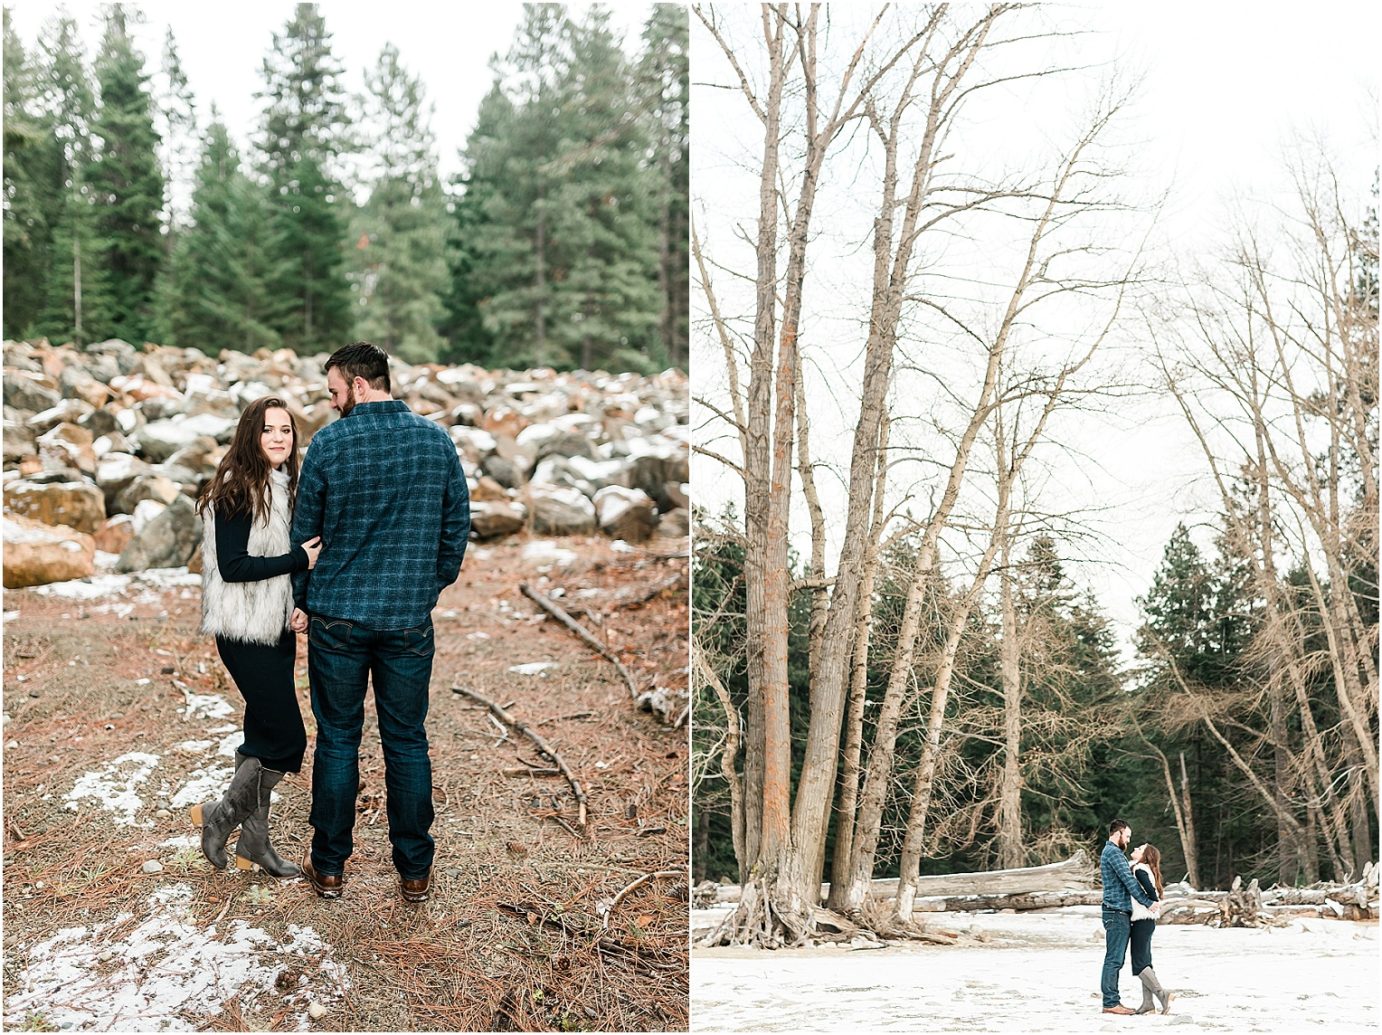 Lake Cle Elum Engagement Session Cle Elum WA Andrew and Stella by the lake